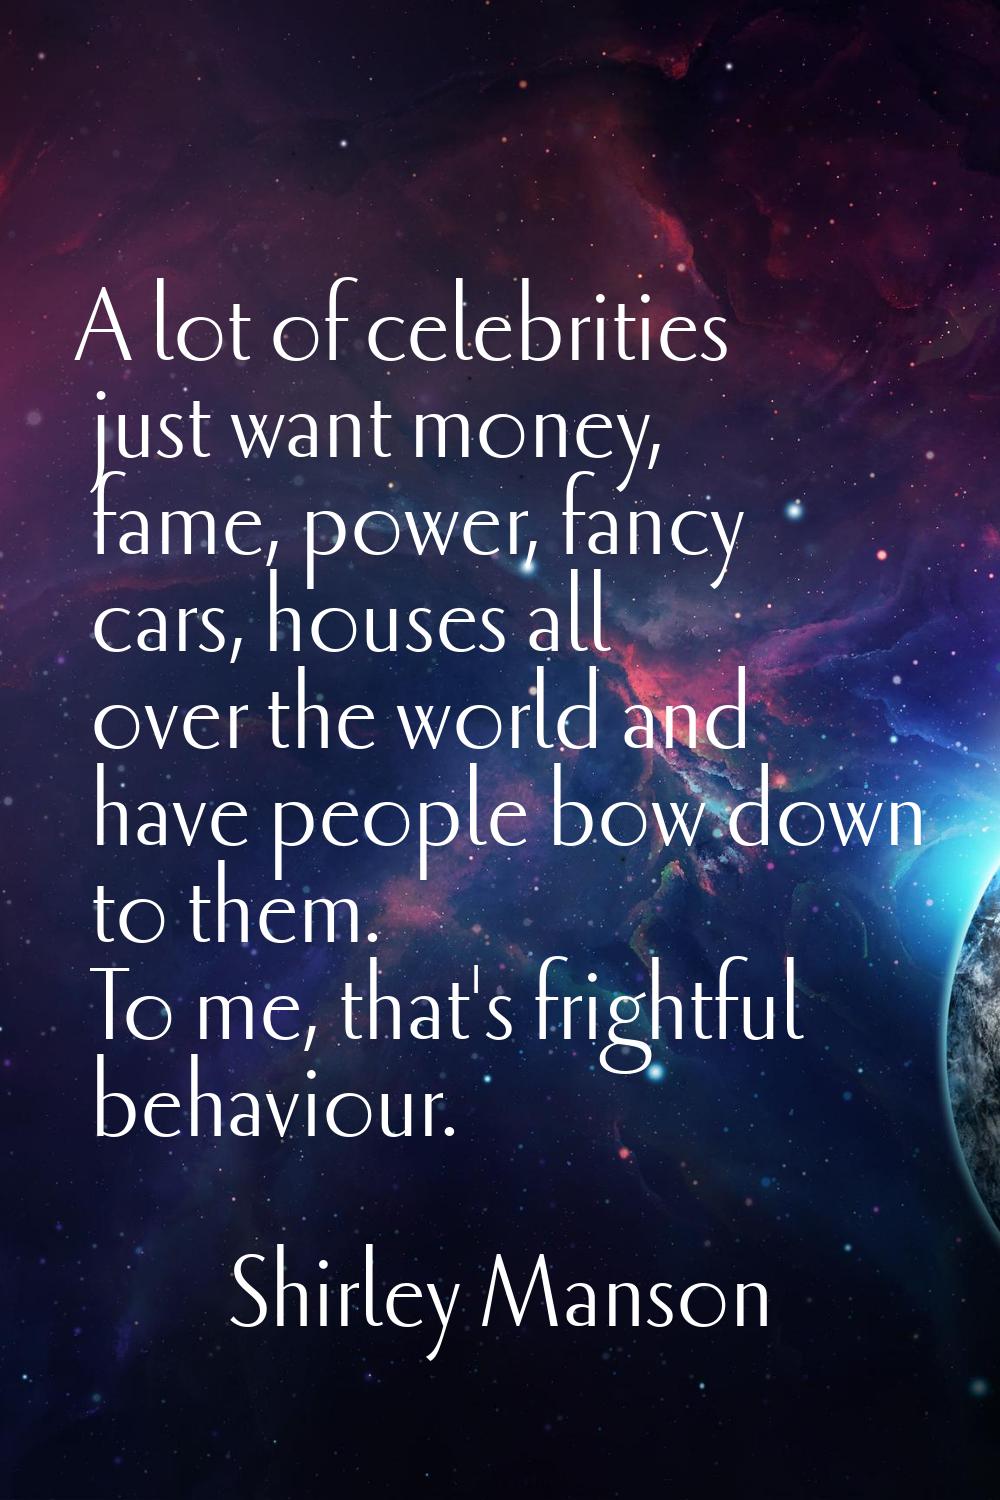 A lot of celebrities just want money, fame, power, fancy cars, houses all over the world and have p